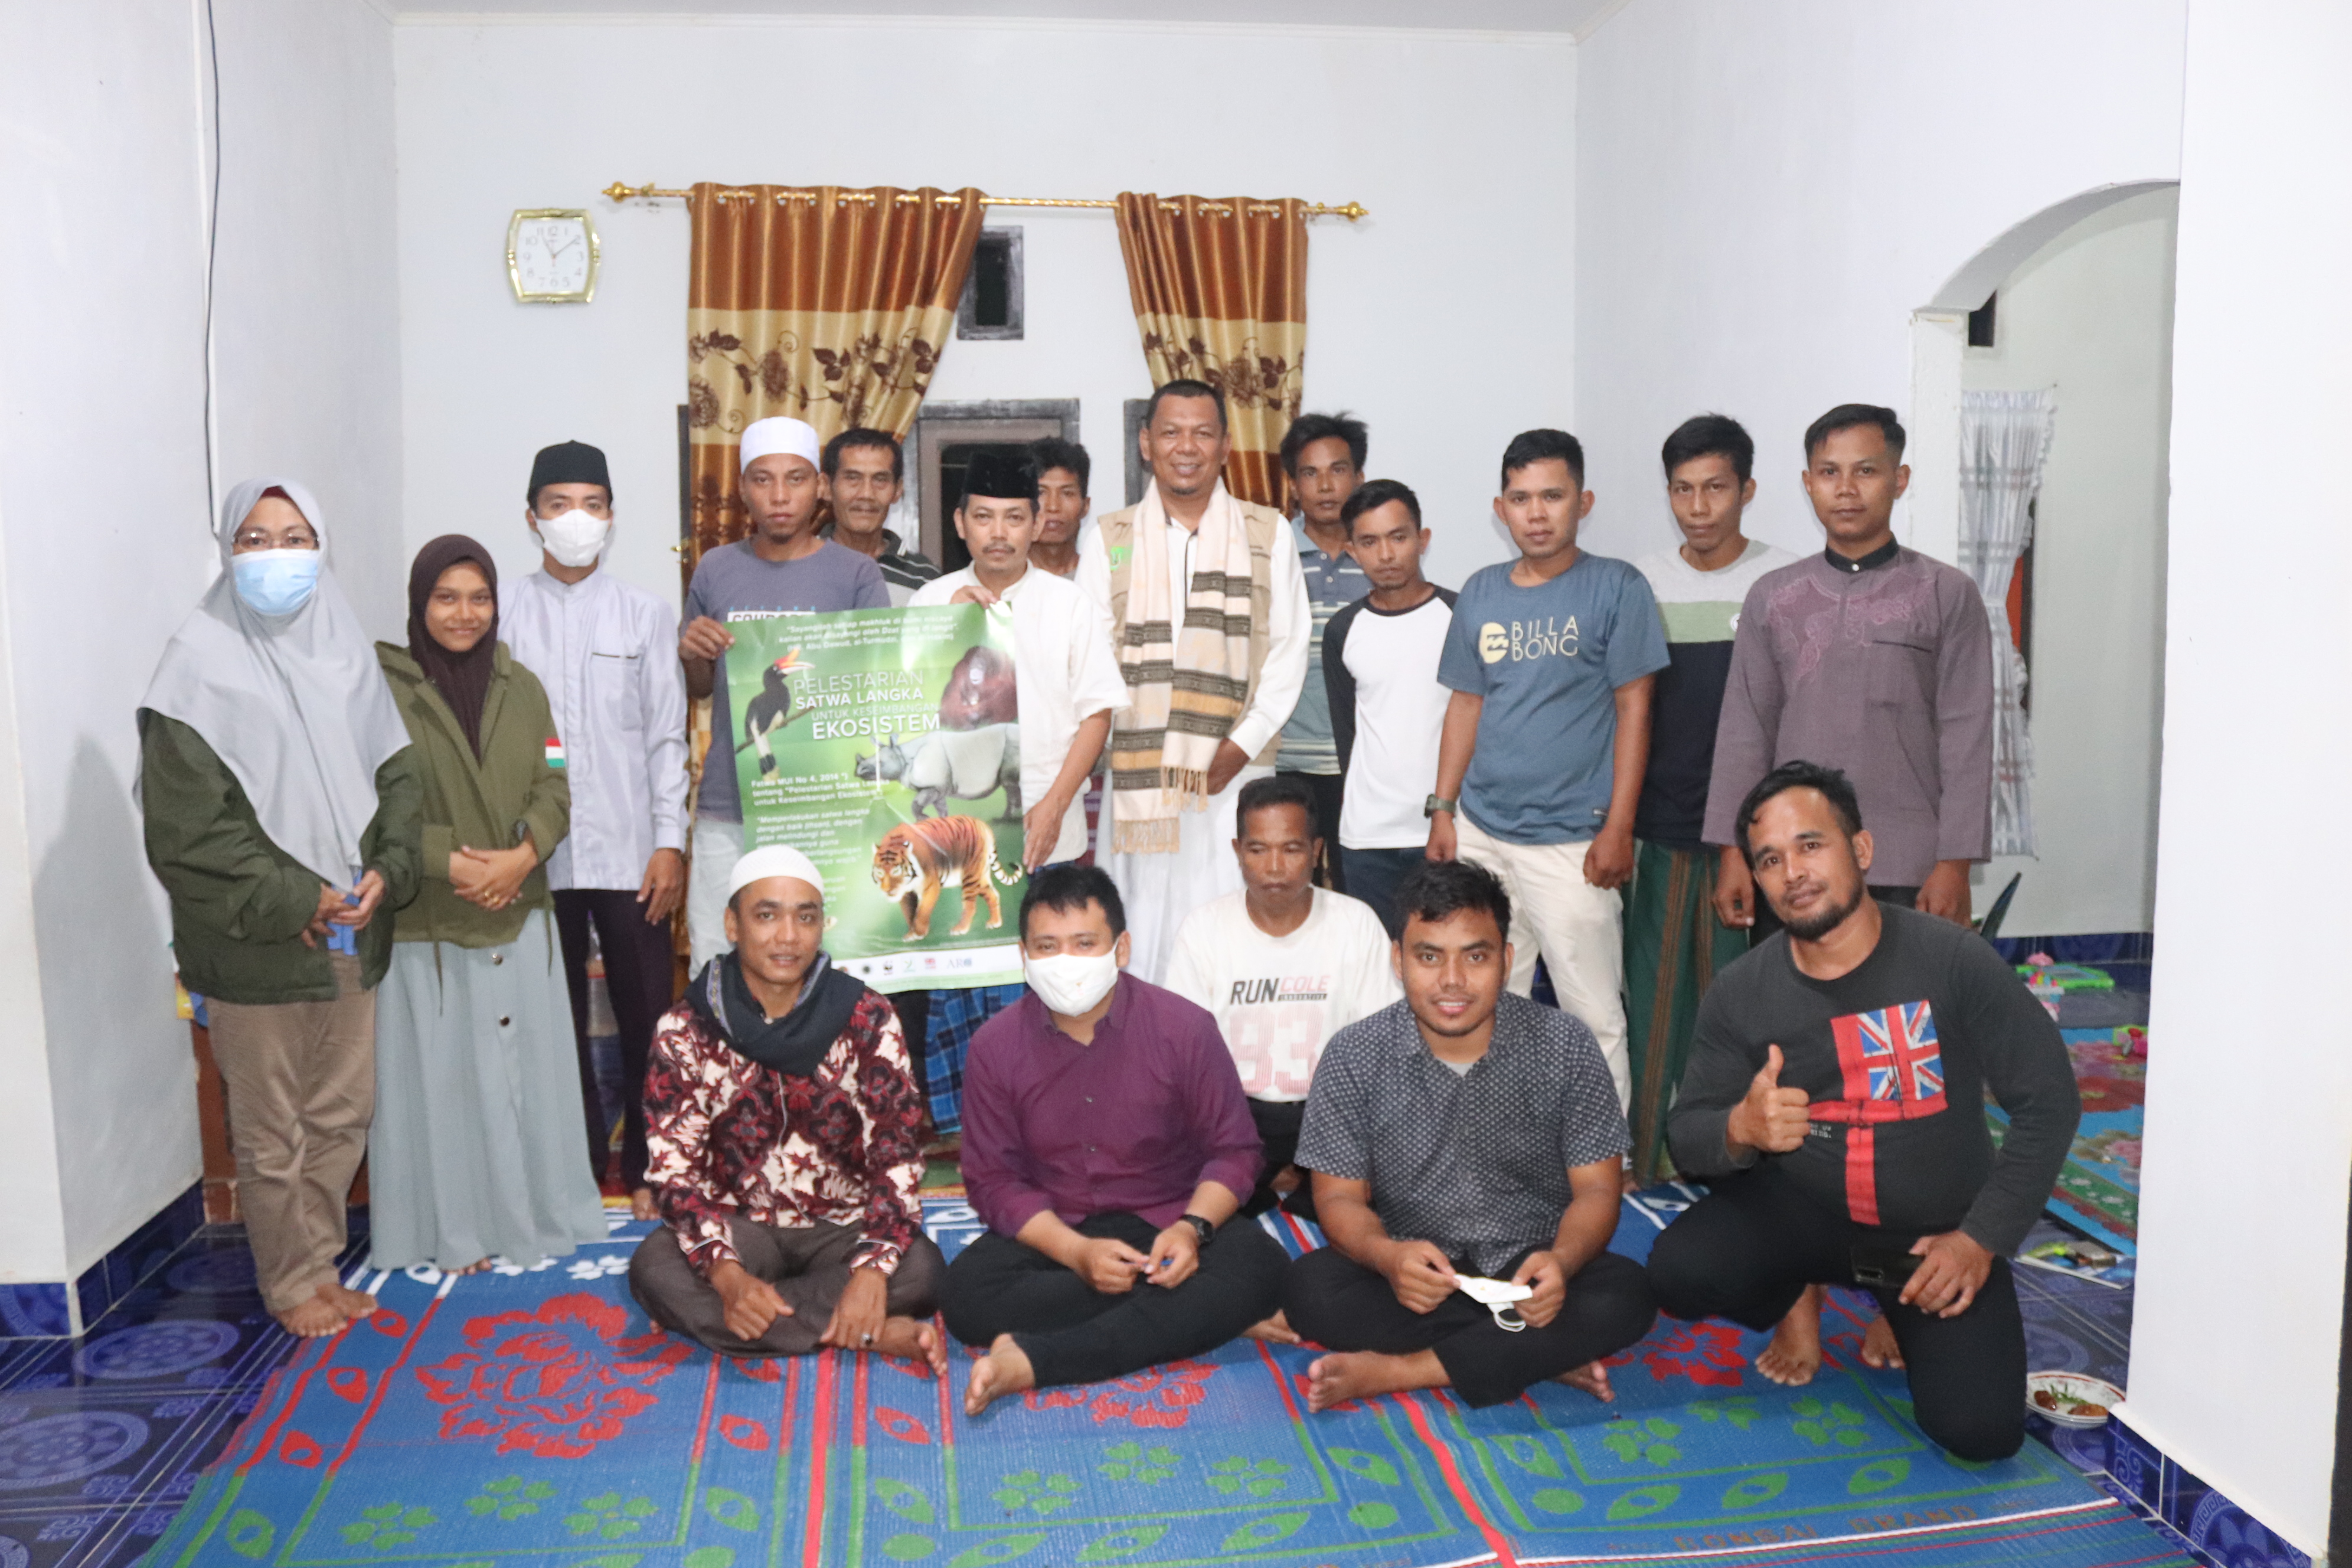 PPI UNAS Team and community at Rimbang Baling Wildlife Reserve hold a poster regarding the The Fatwa of Wildlife Protection for the Balance of Ecosystem. (Photo: Taufik Mulyana/PPI UNAS)